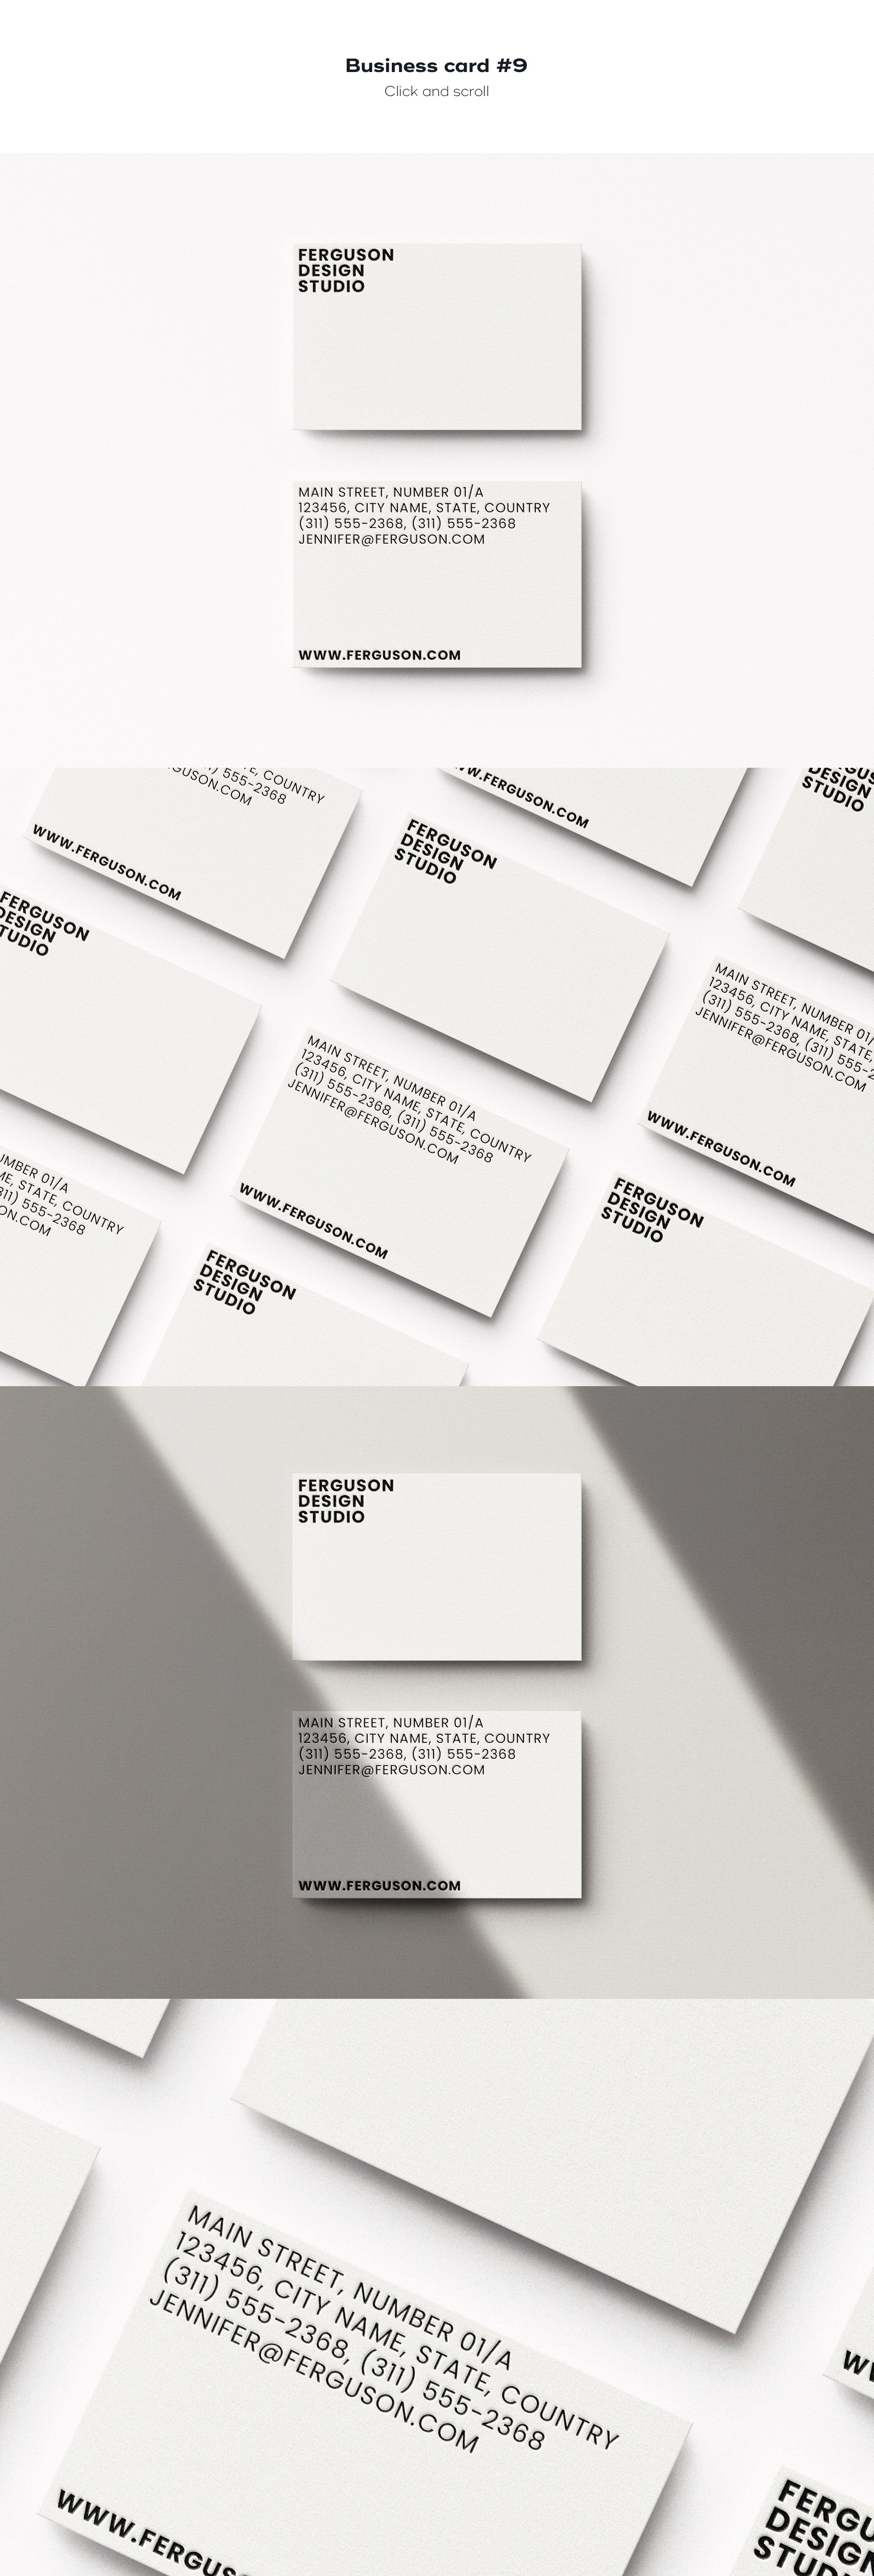 business card 9 862